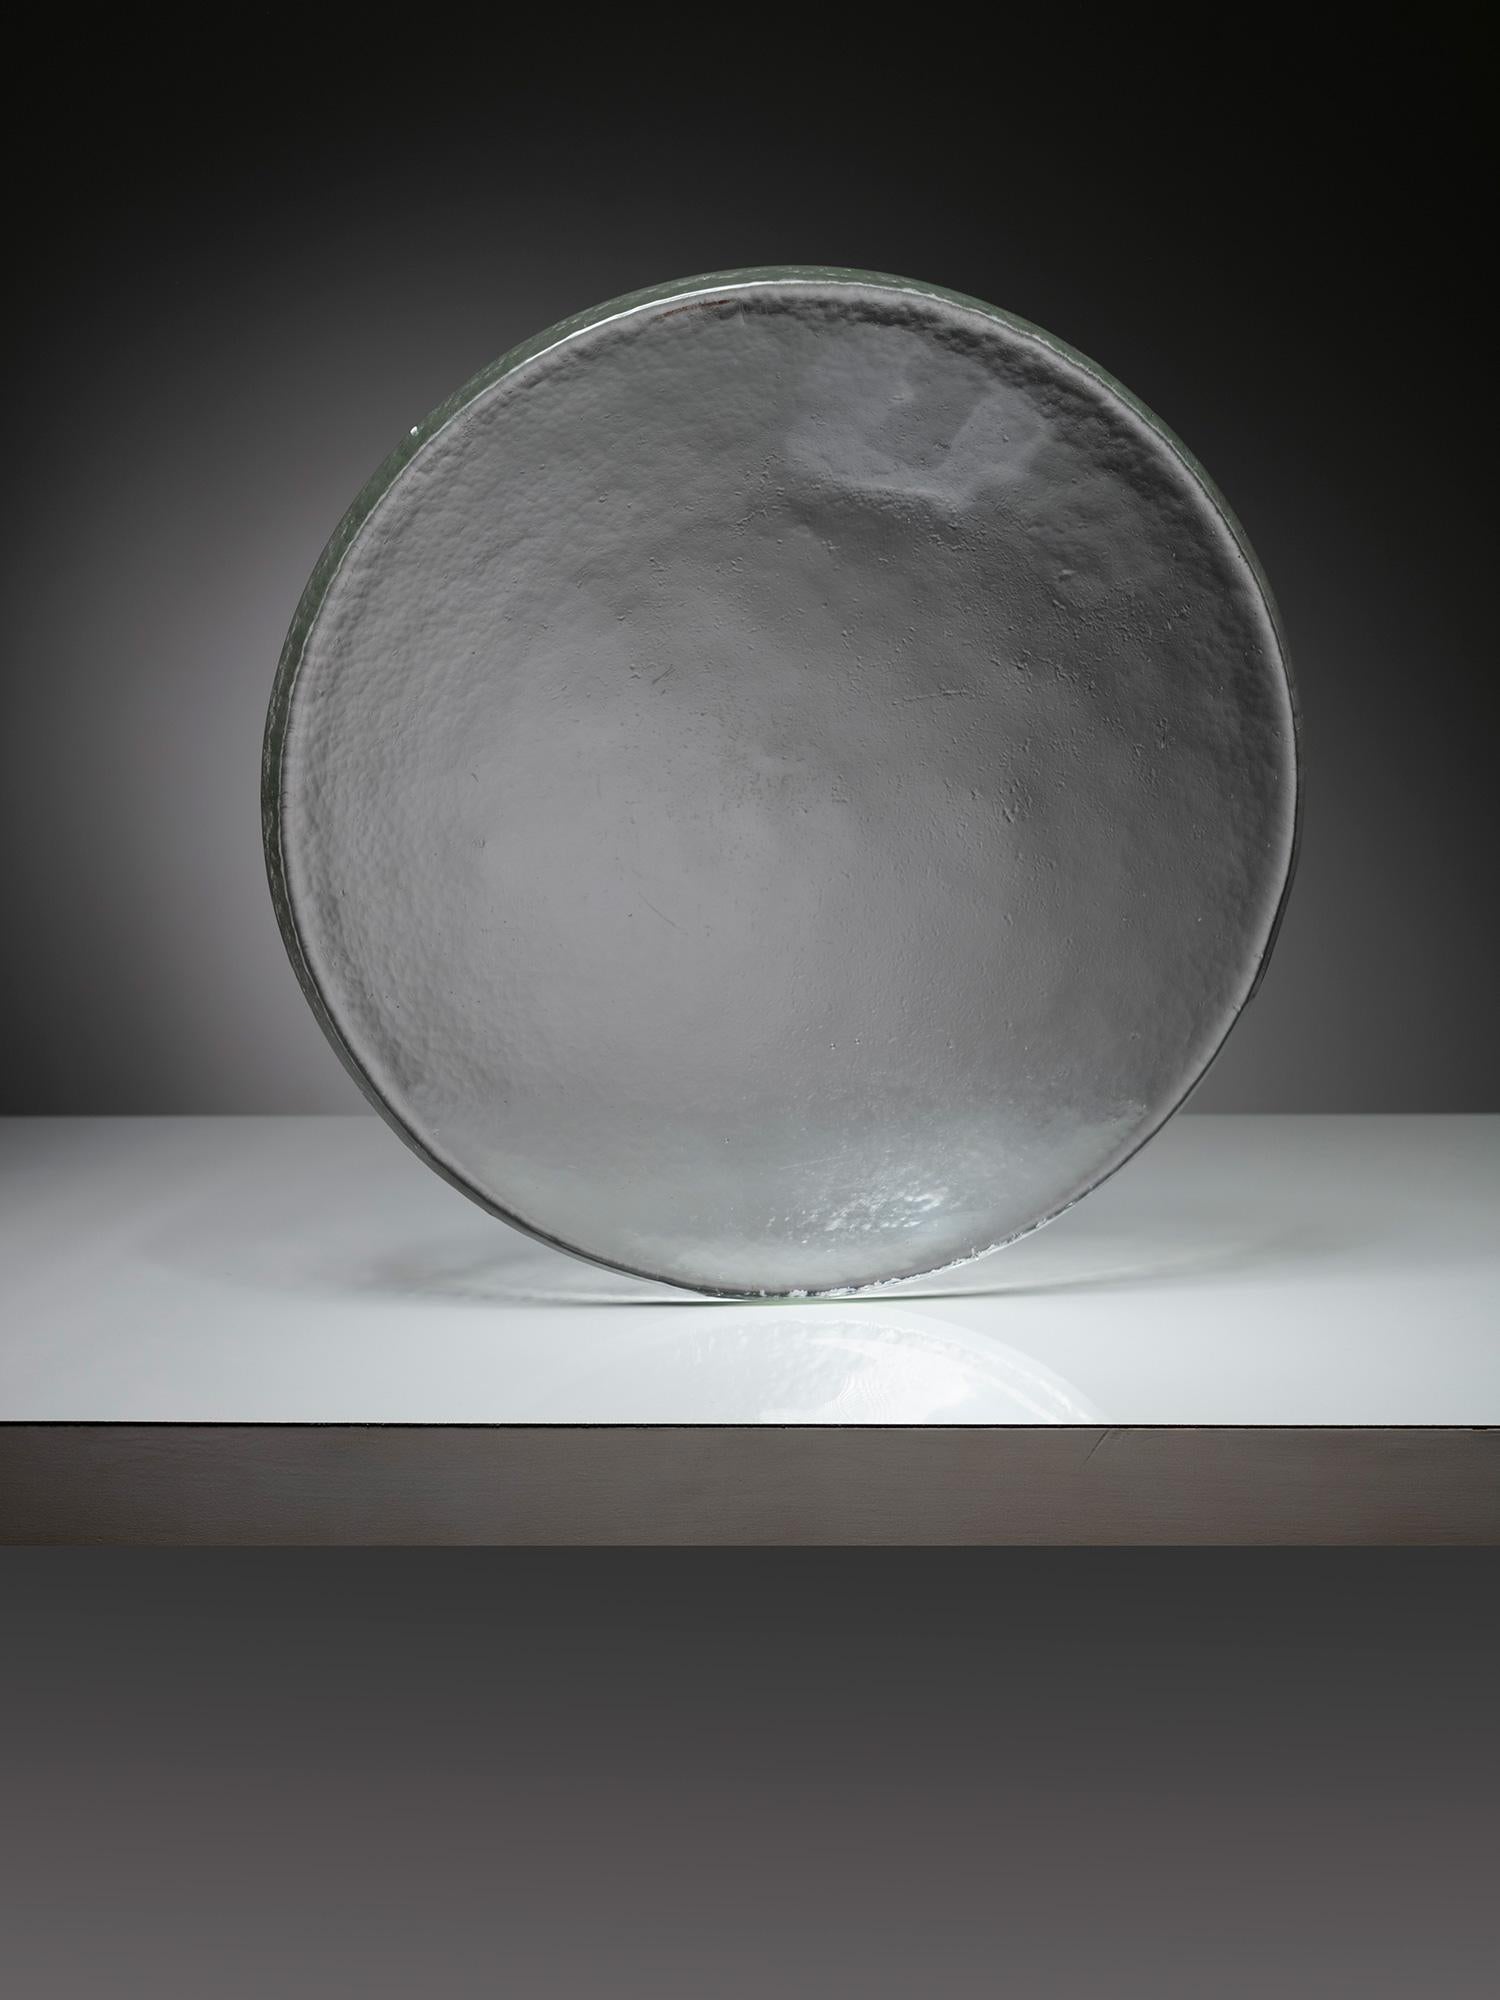 Murano glass centerpiece by Barbini.
Imposing thick glass lens shaped piece with hammered surface